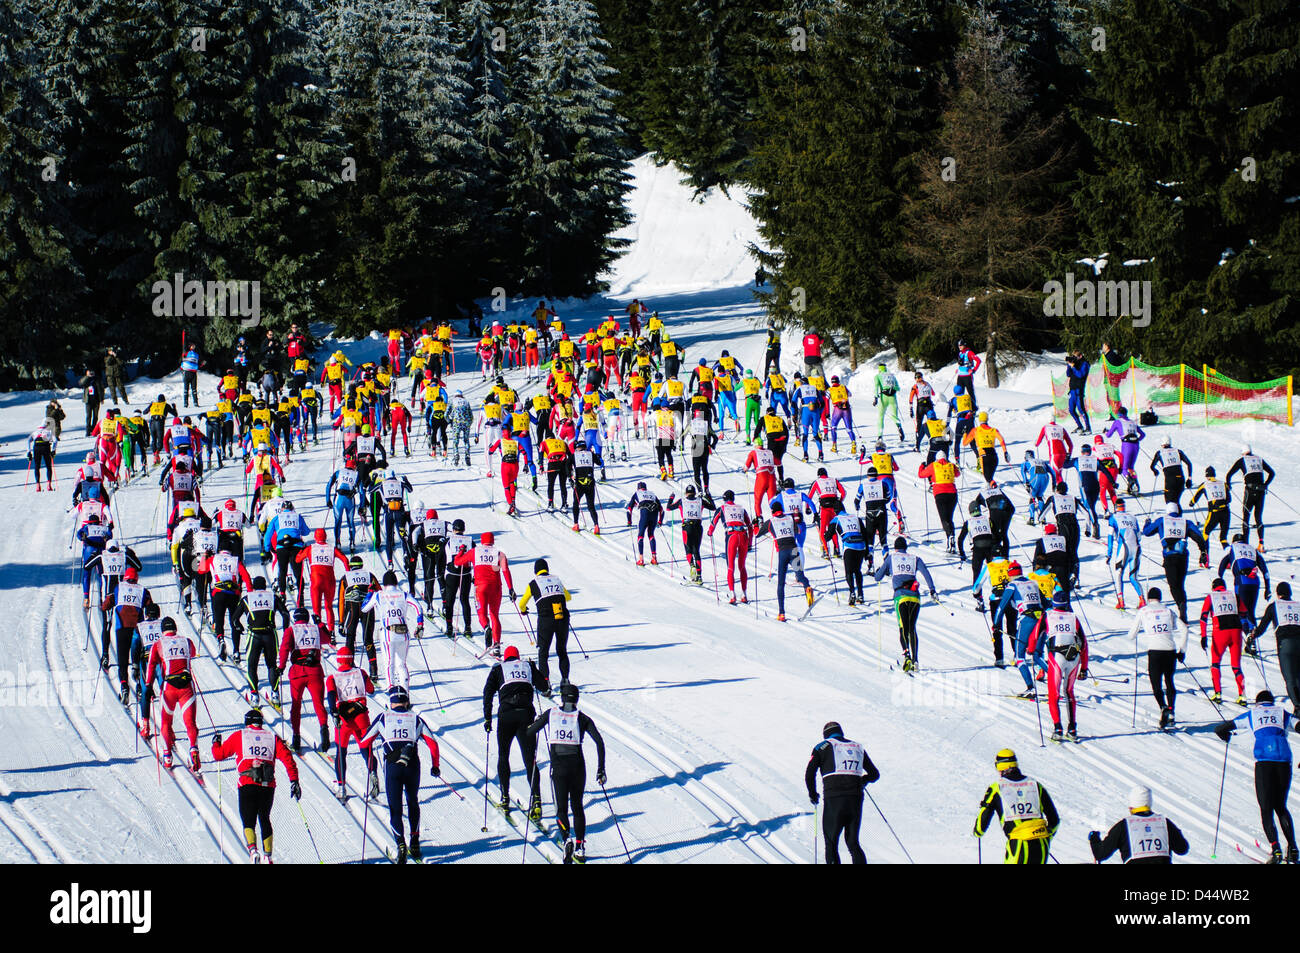 A large number of skiers going uphill at the Bieg Piastow cross-country race, Jakuszyce, Poland. Stock Photo